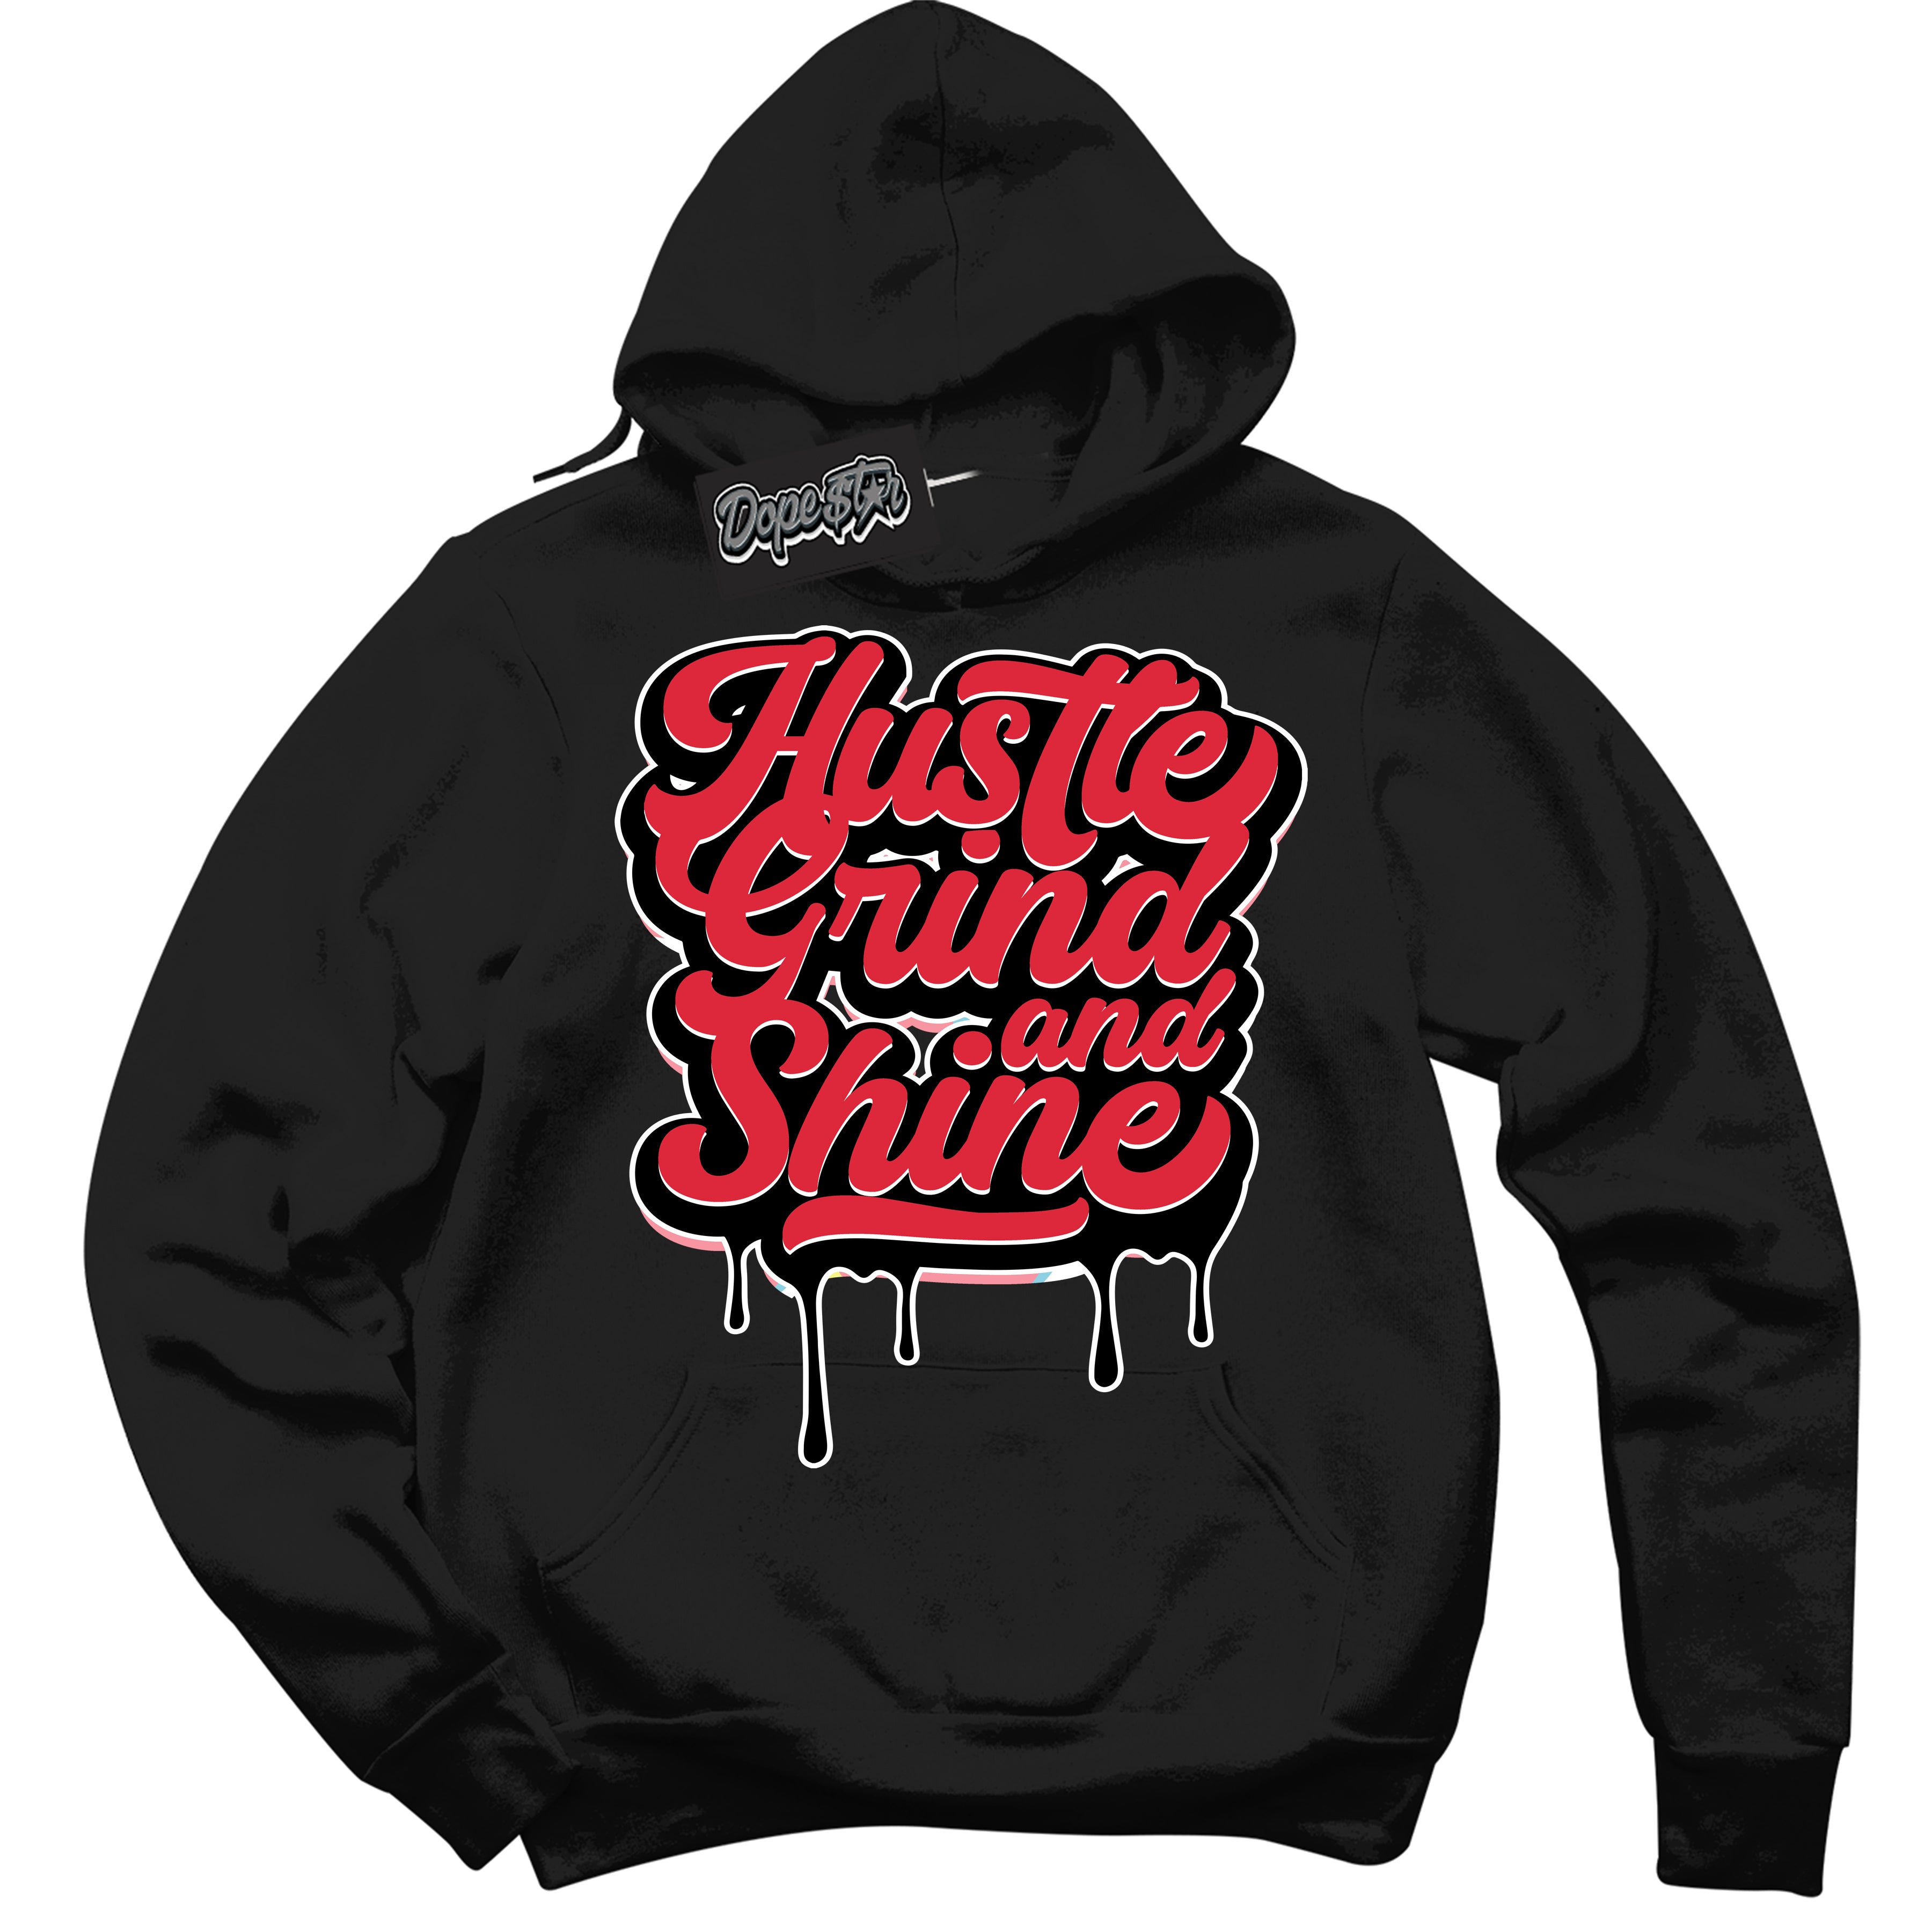 Cool Black Graphic DopeStar Hoodie with “ Hustle Grind And Shine “ print, that perfectly matches Spider-Verse 1s sneakers